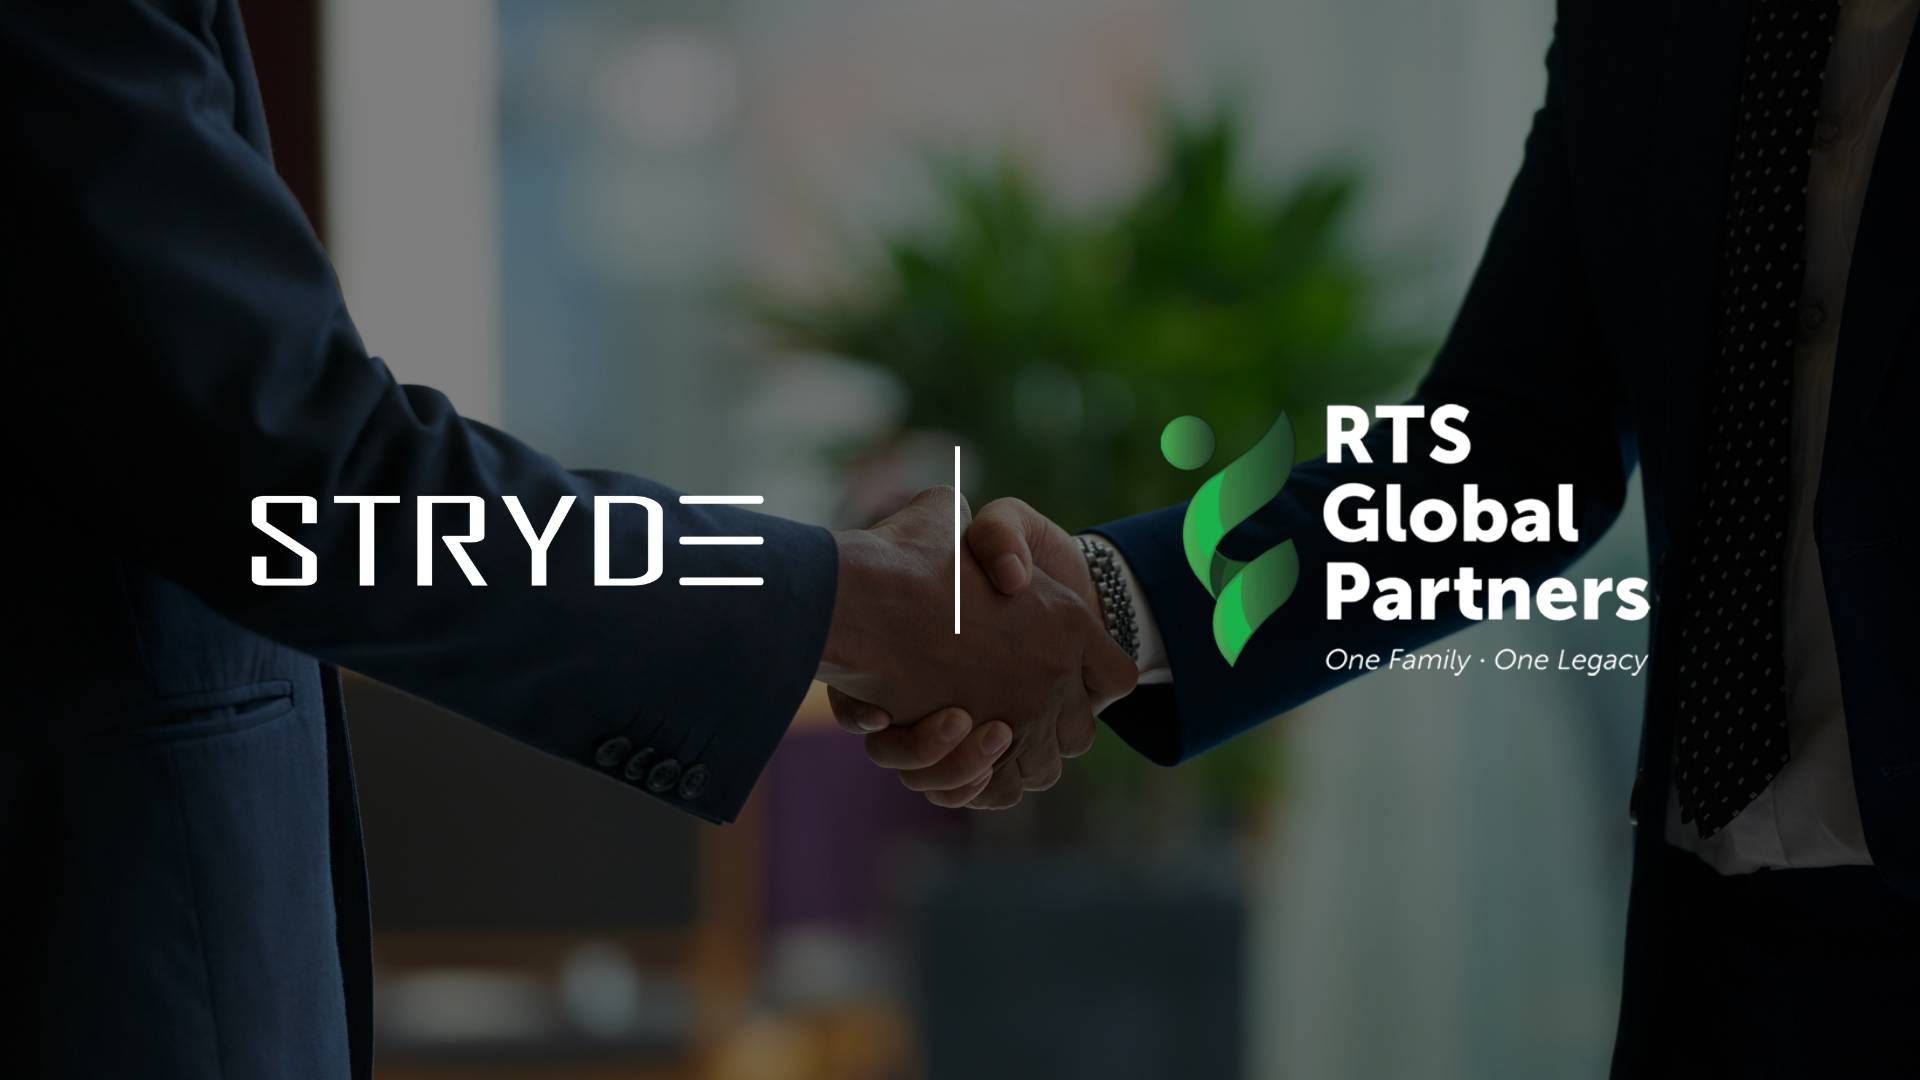 Stryde Search Forms Strategic Partnership with RTS Global Partners to Expand Family Office Networks